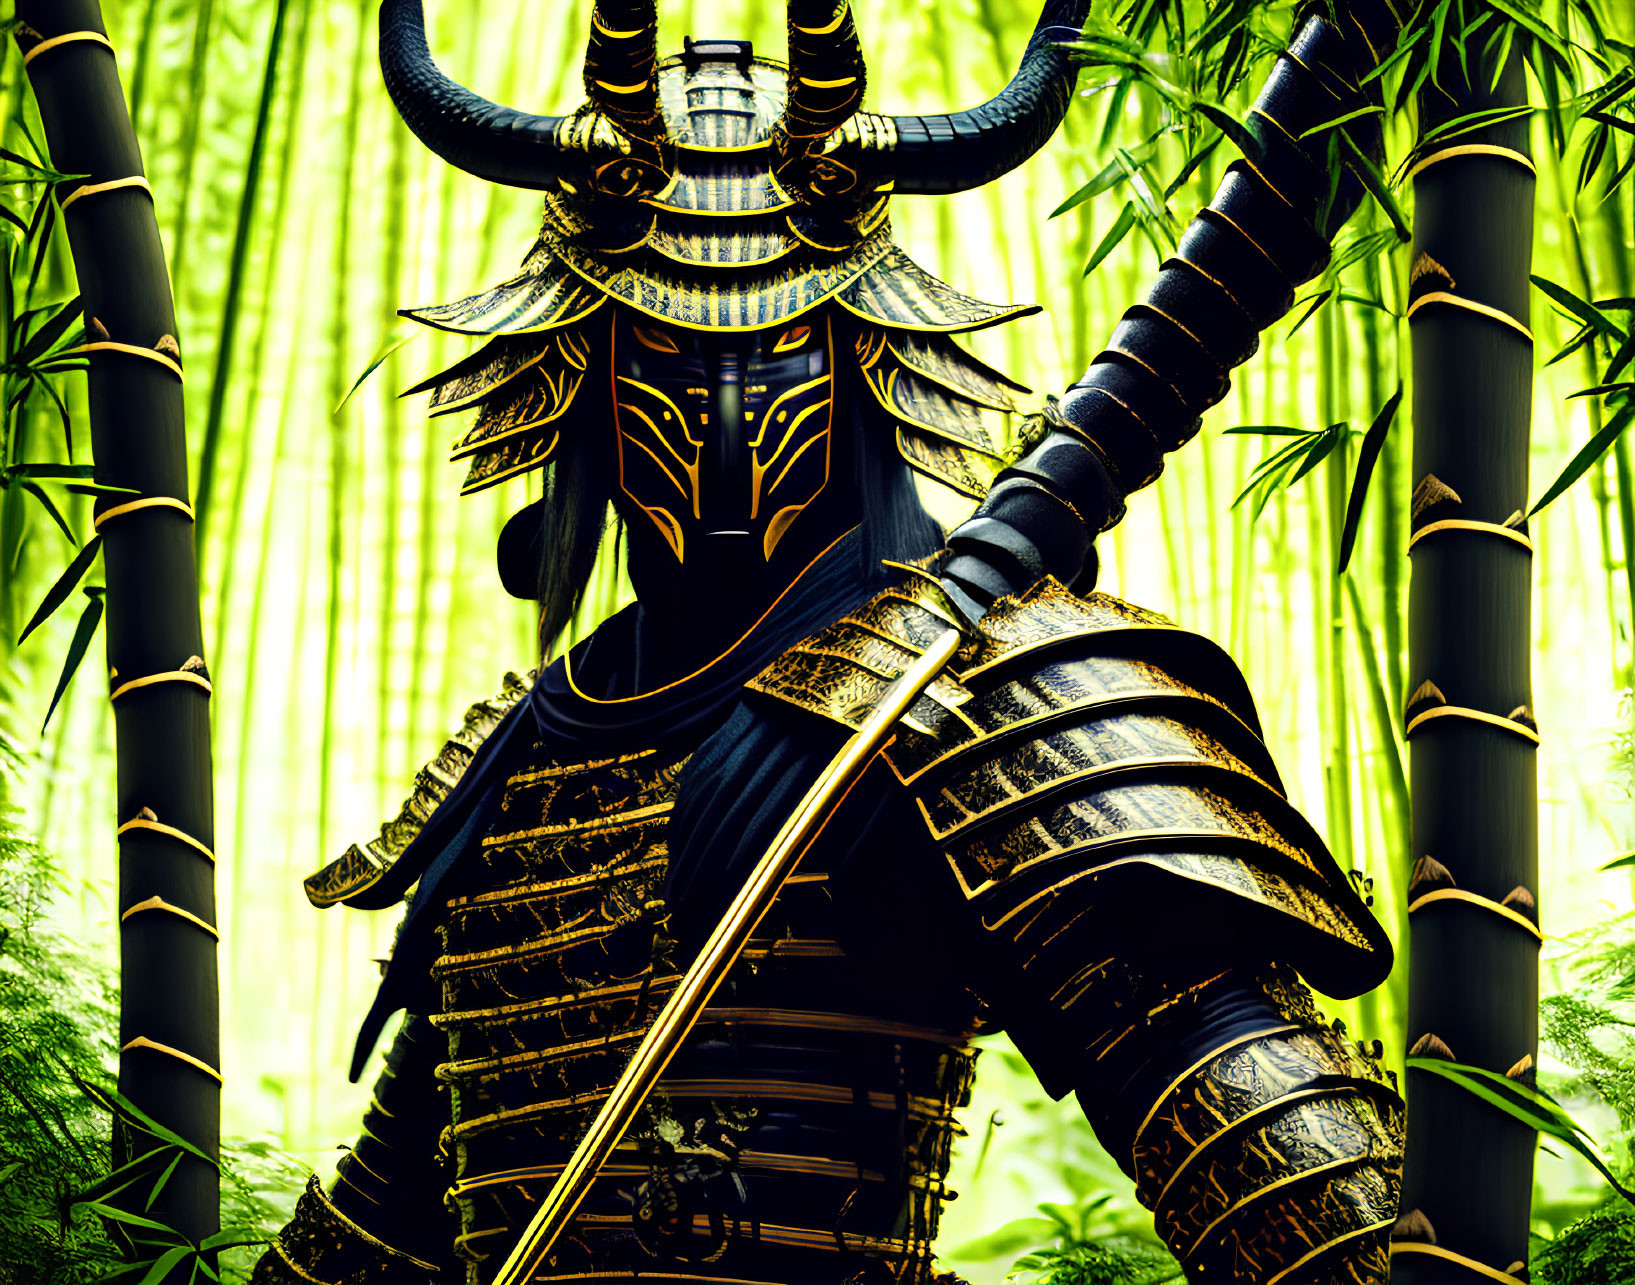 Stylized black and gold samurai in bamboo forest.